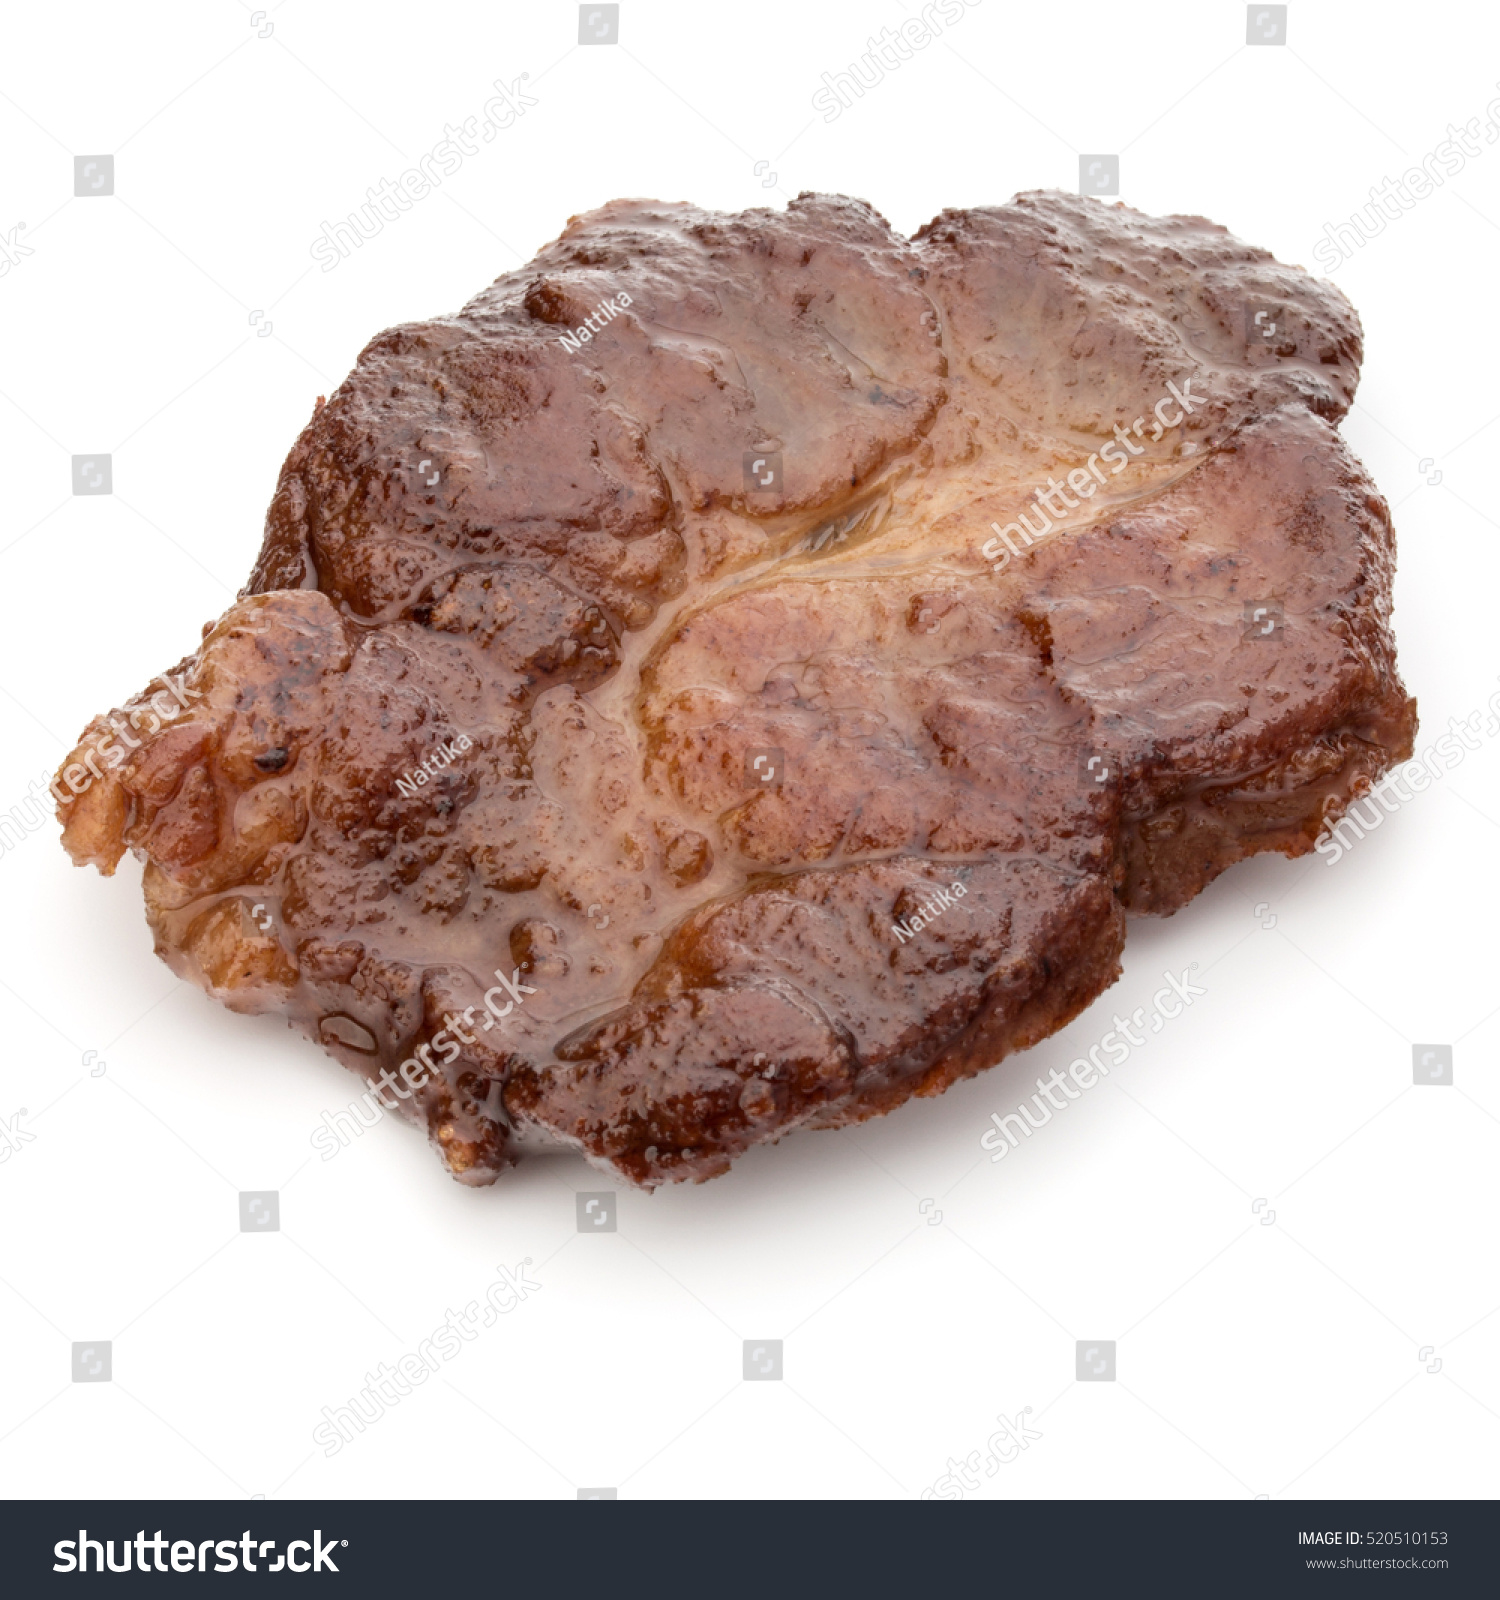 Cooked fried pork meat isolated on white background cutout #520510153